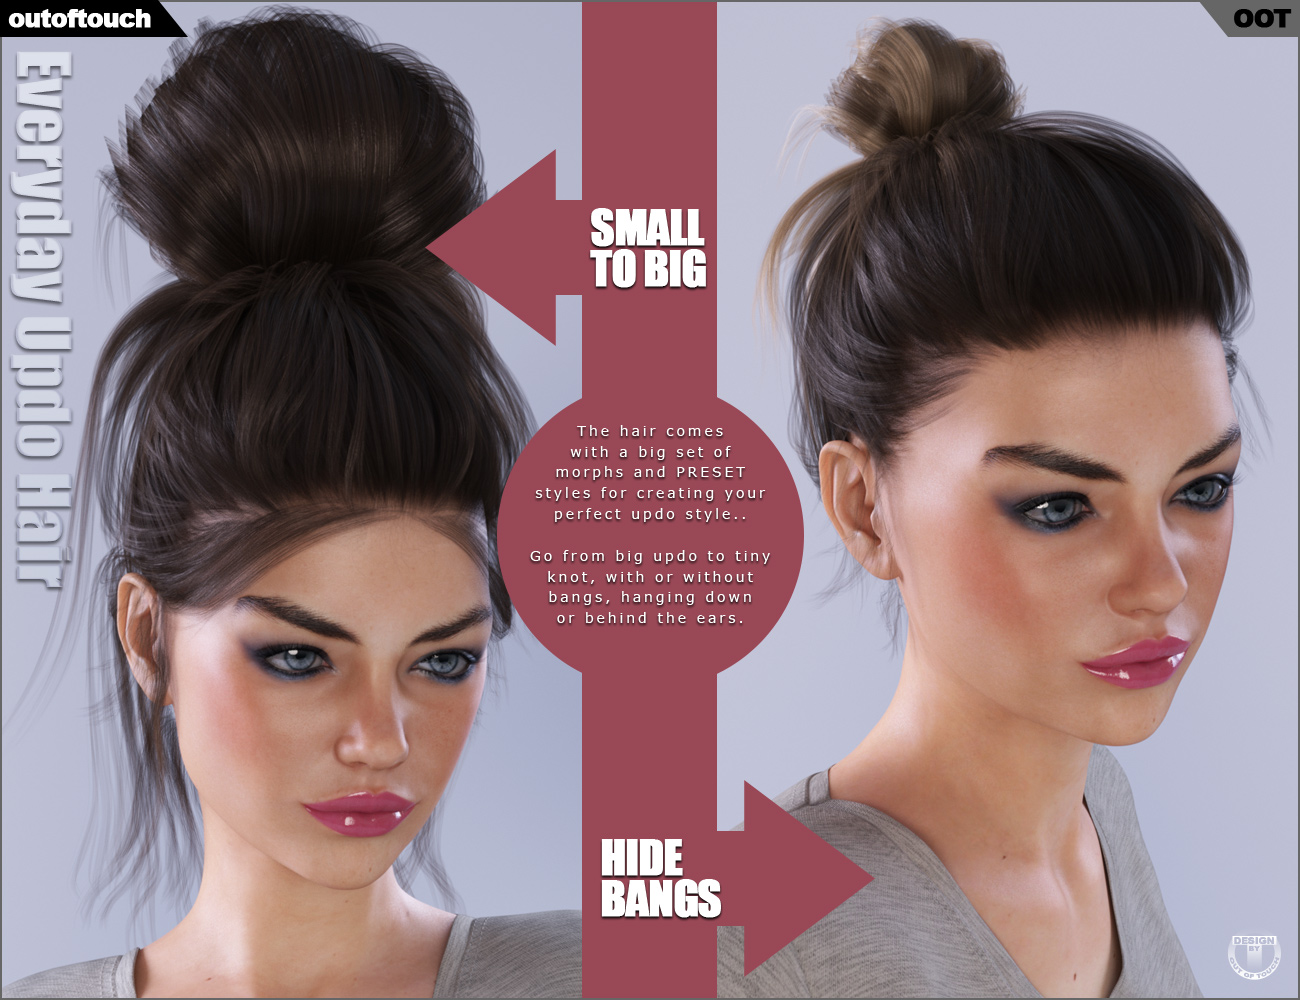 Everyday Updo Hair and OOT Hairblending 2.0 for Genesis 3 Female(s) by: outoftouch, 3D Models by Daz 3D